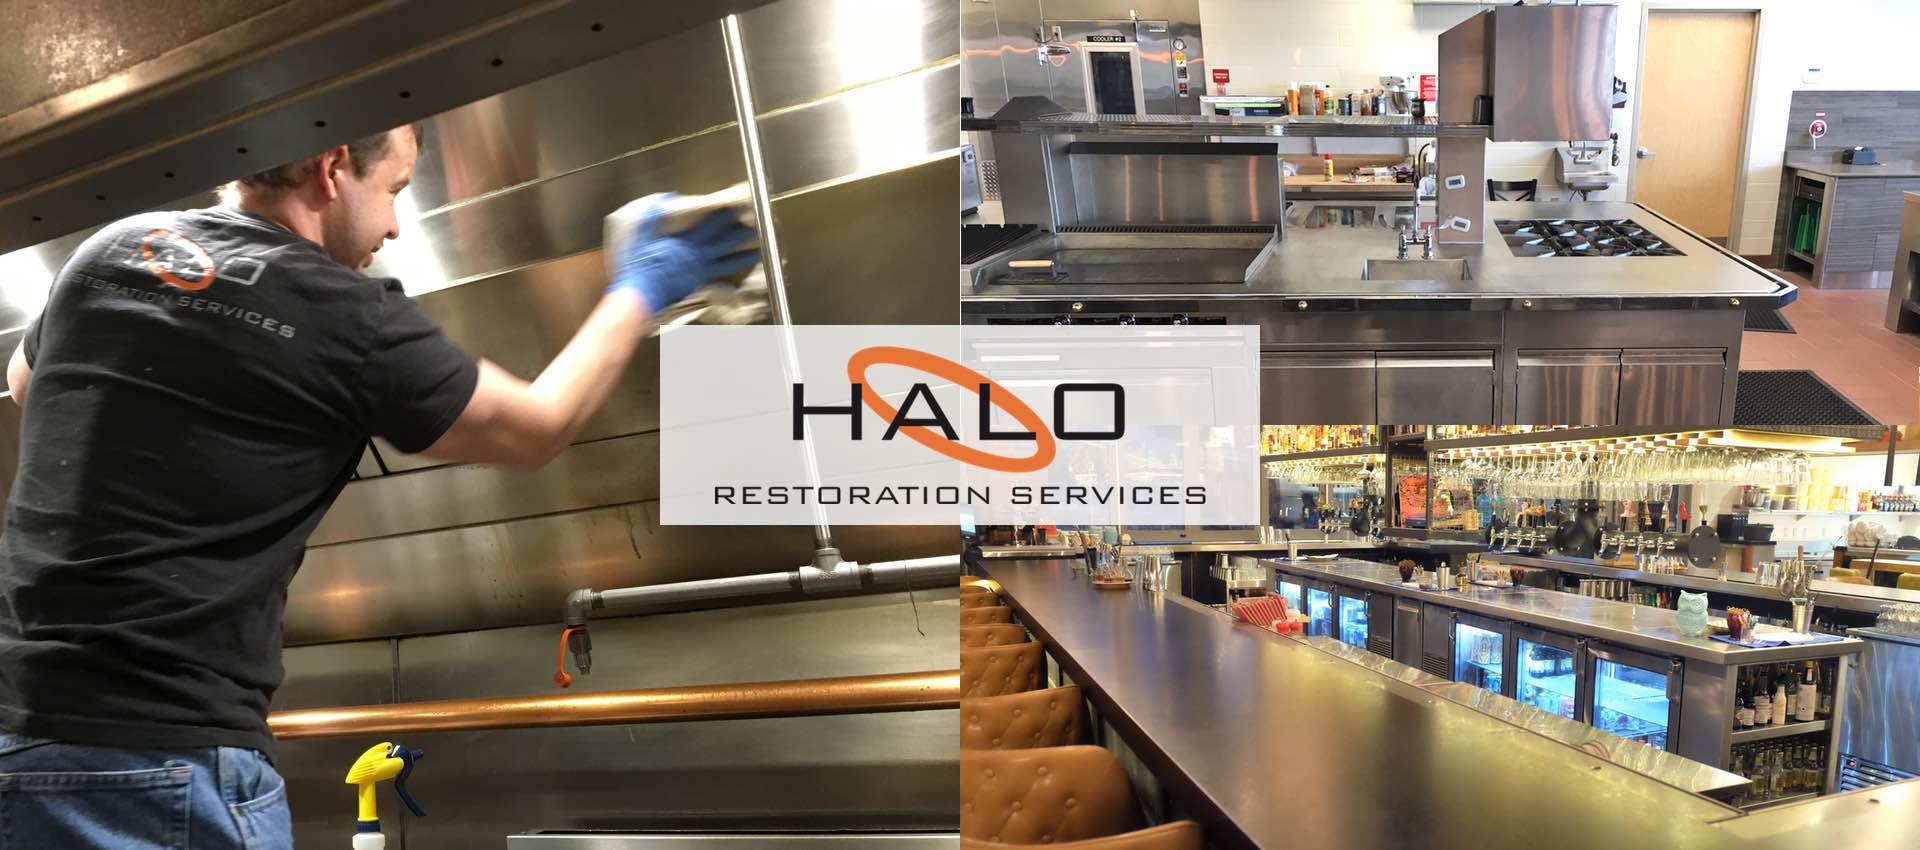 Halo: Full-Service Cleaning Services for F&B Outlets